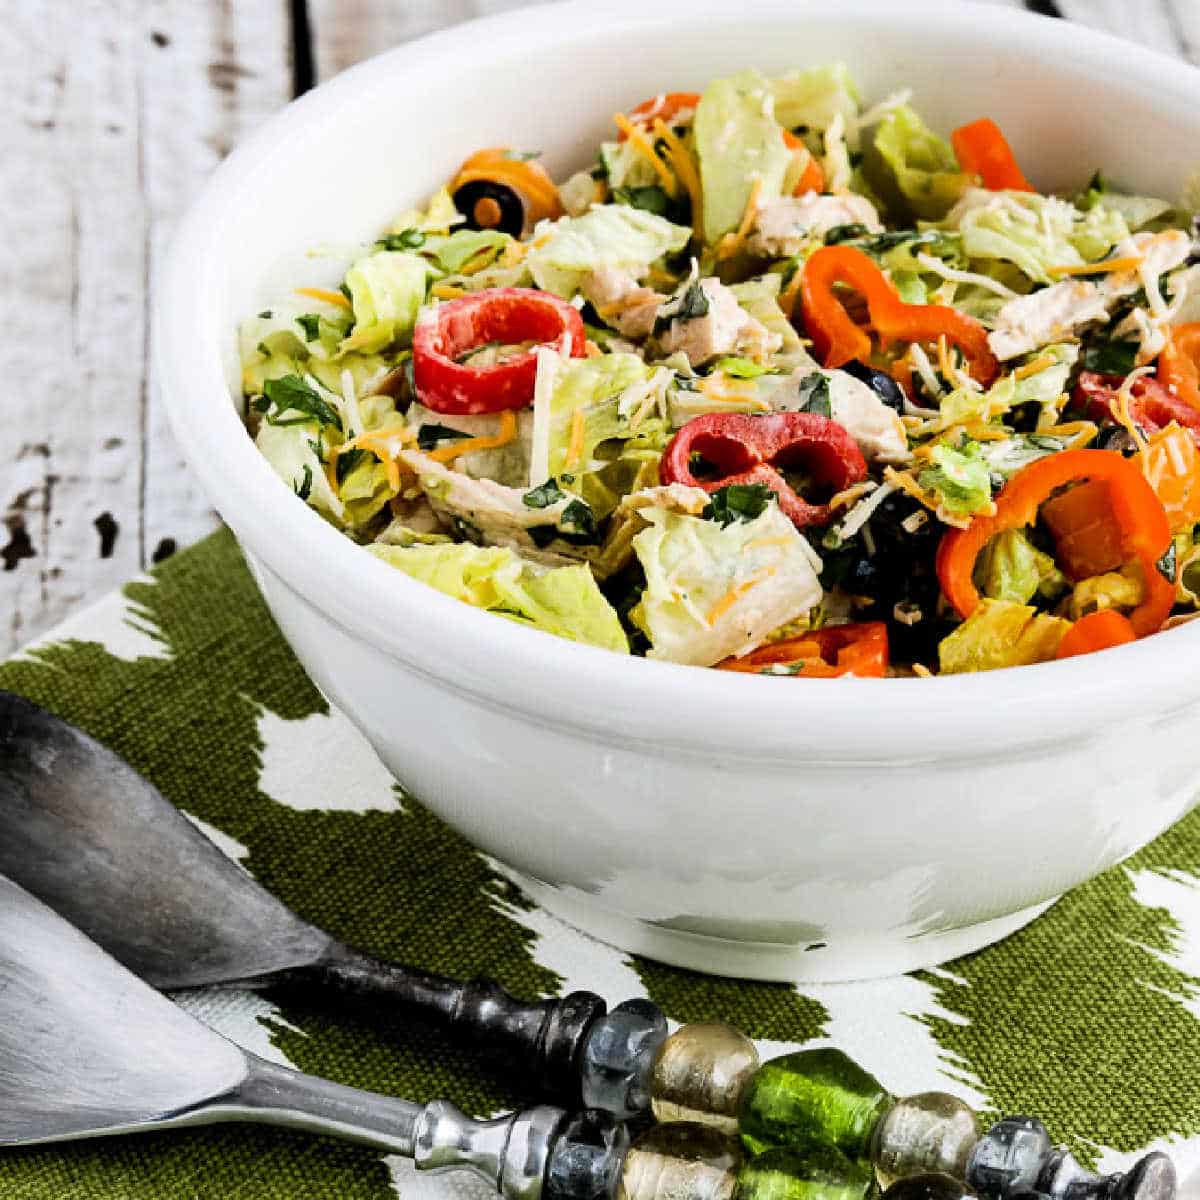 Square image of Southwest Chicken Salad shown in serving bowl with large spoons.